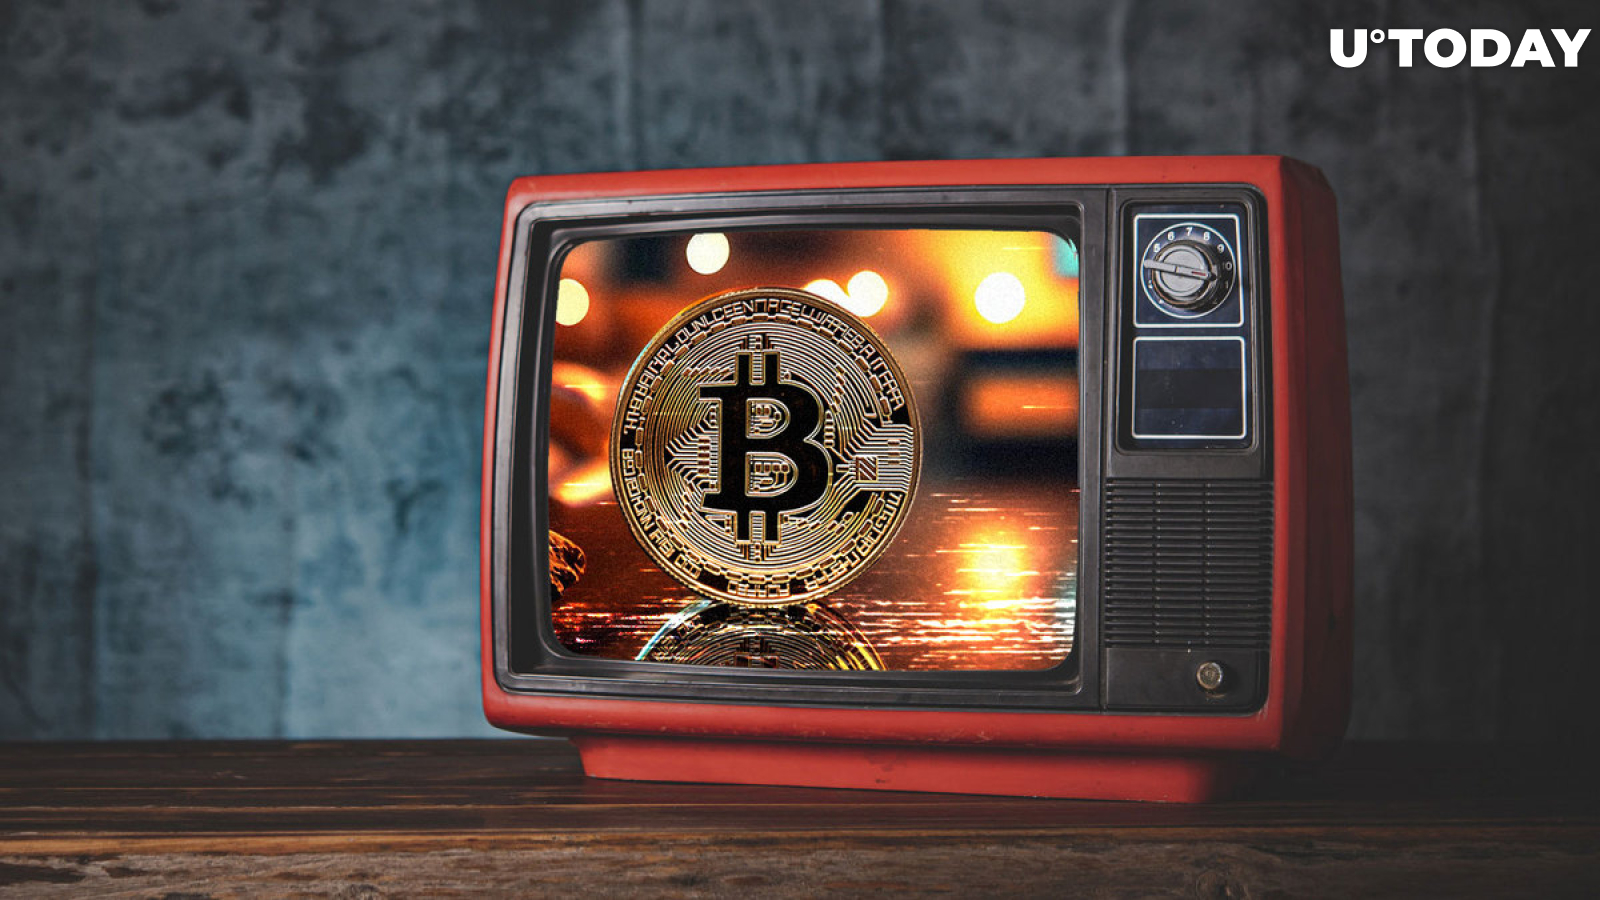 Bitcoin First Featured in TV Series 12 Years Ago, Here's How It Happened